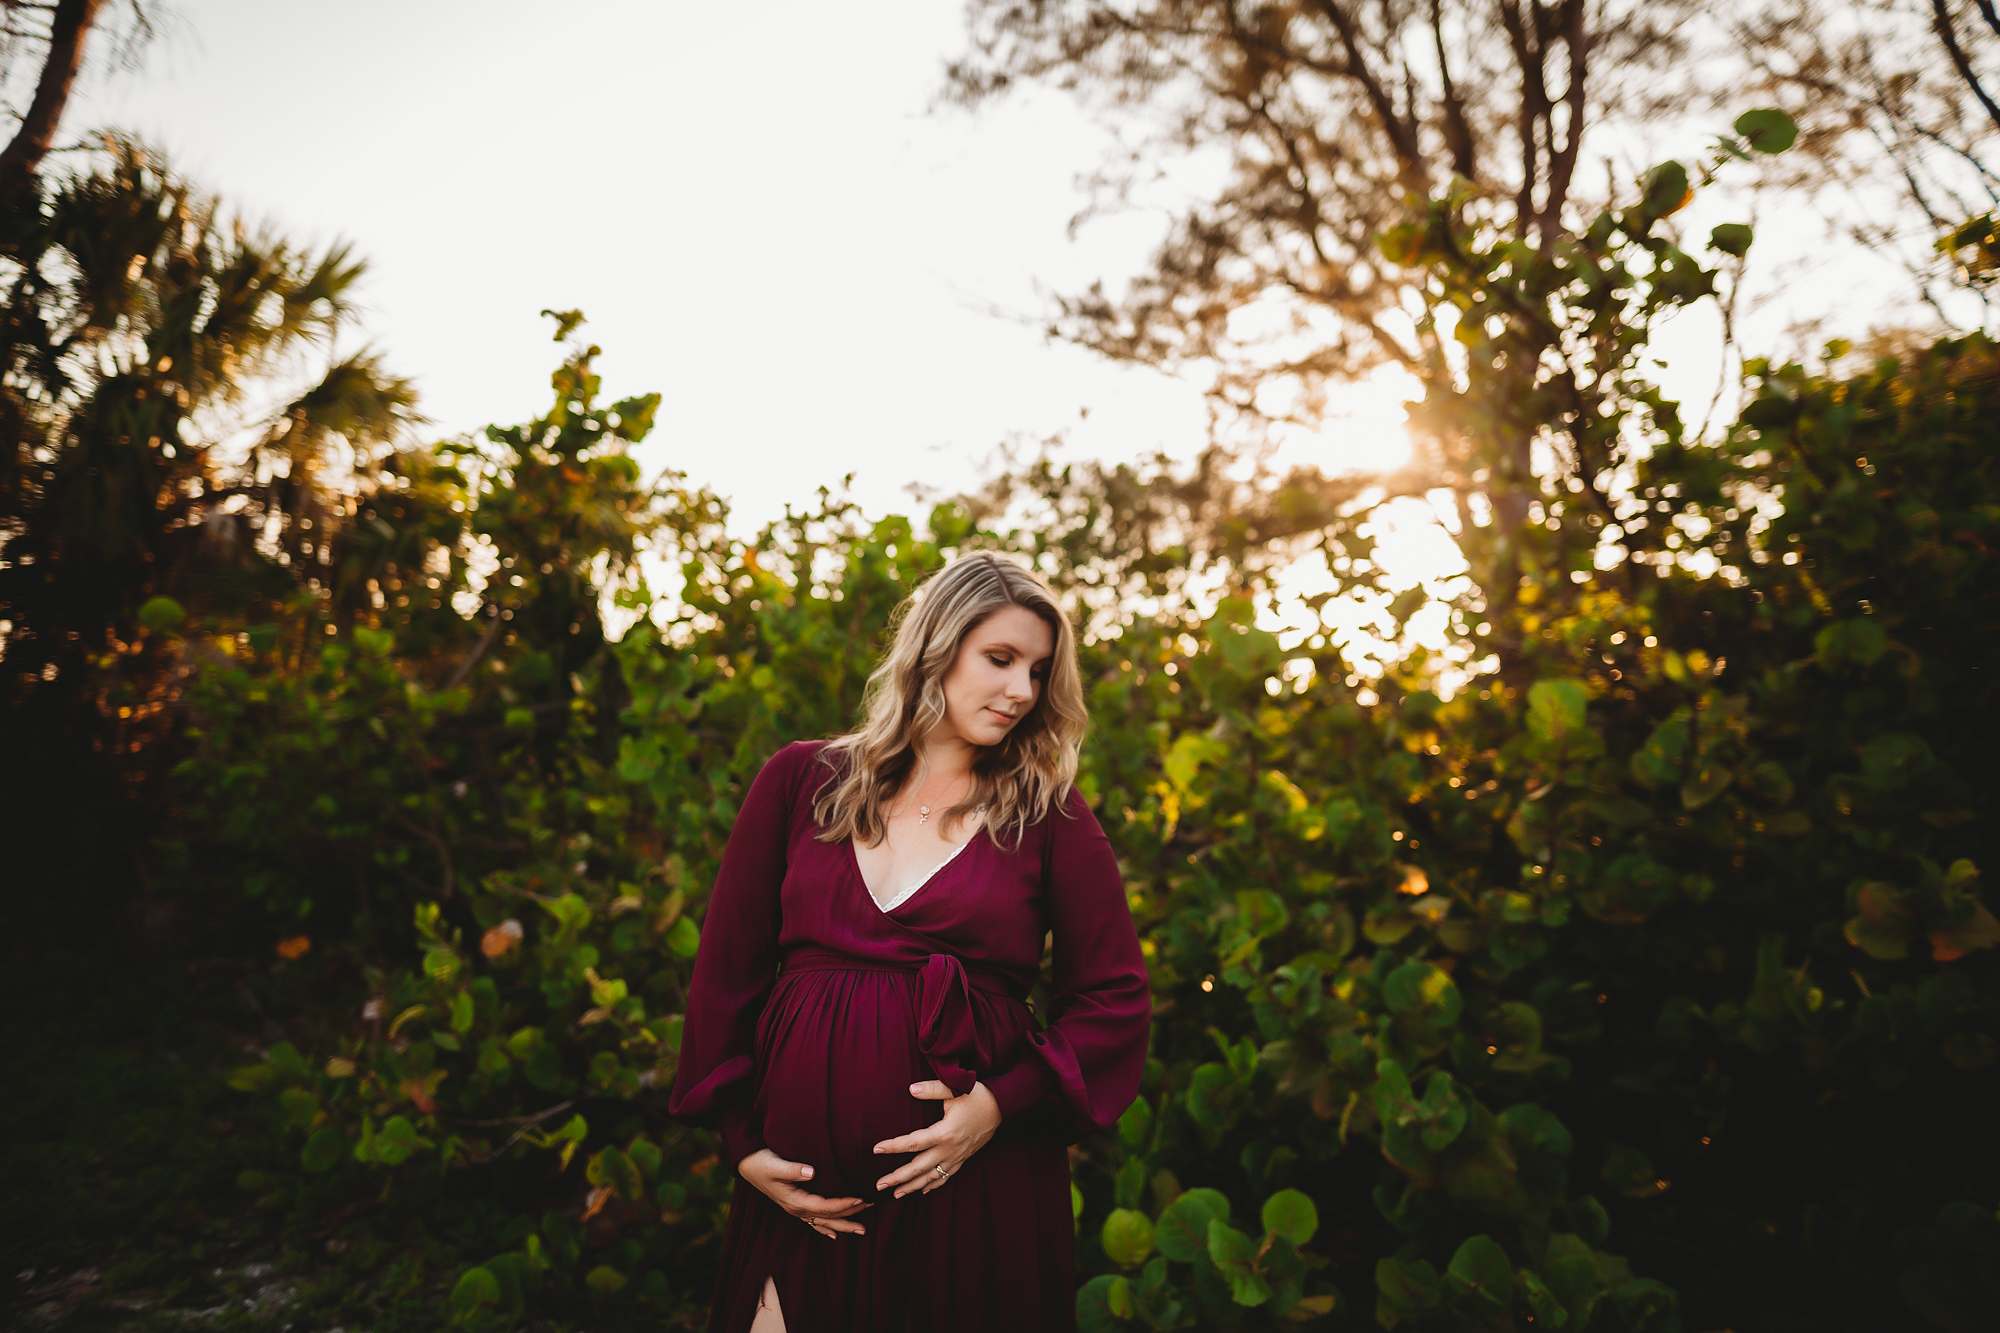 summer maternity portraits in florida, beach maternity photographer of tampa bay fl 